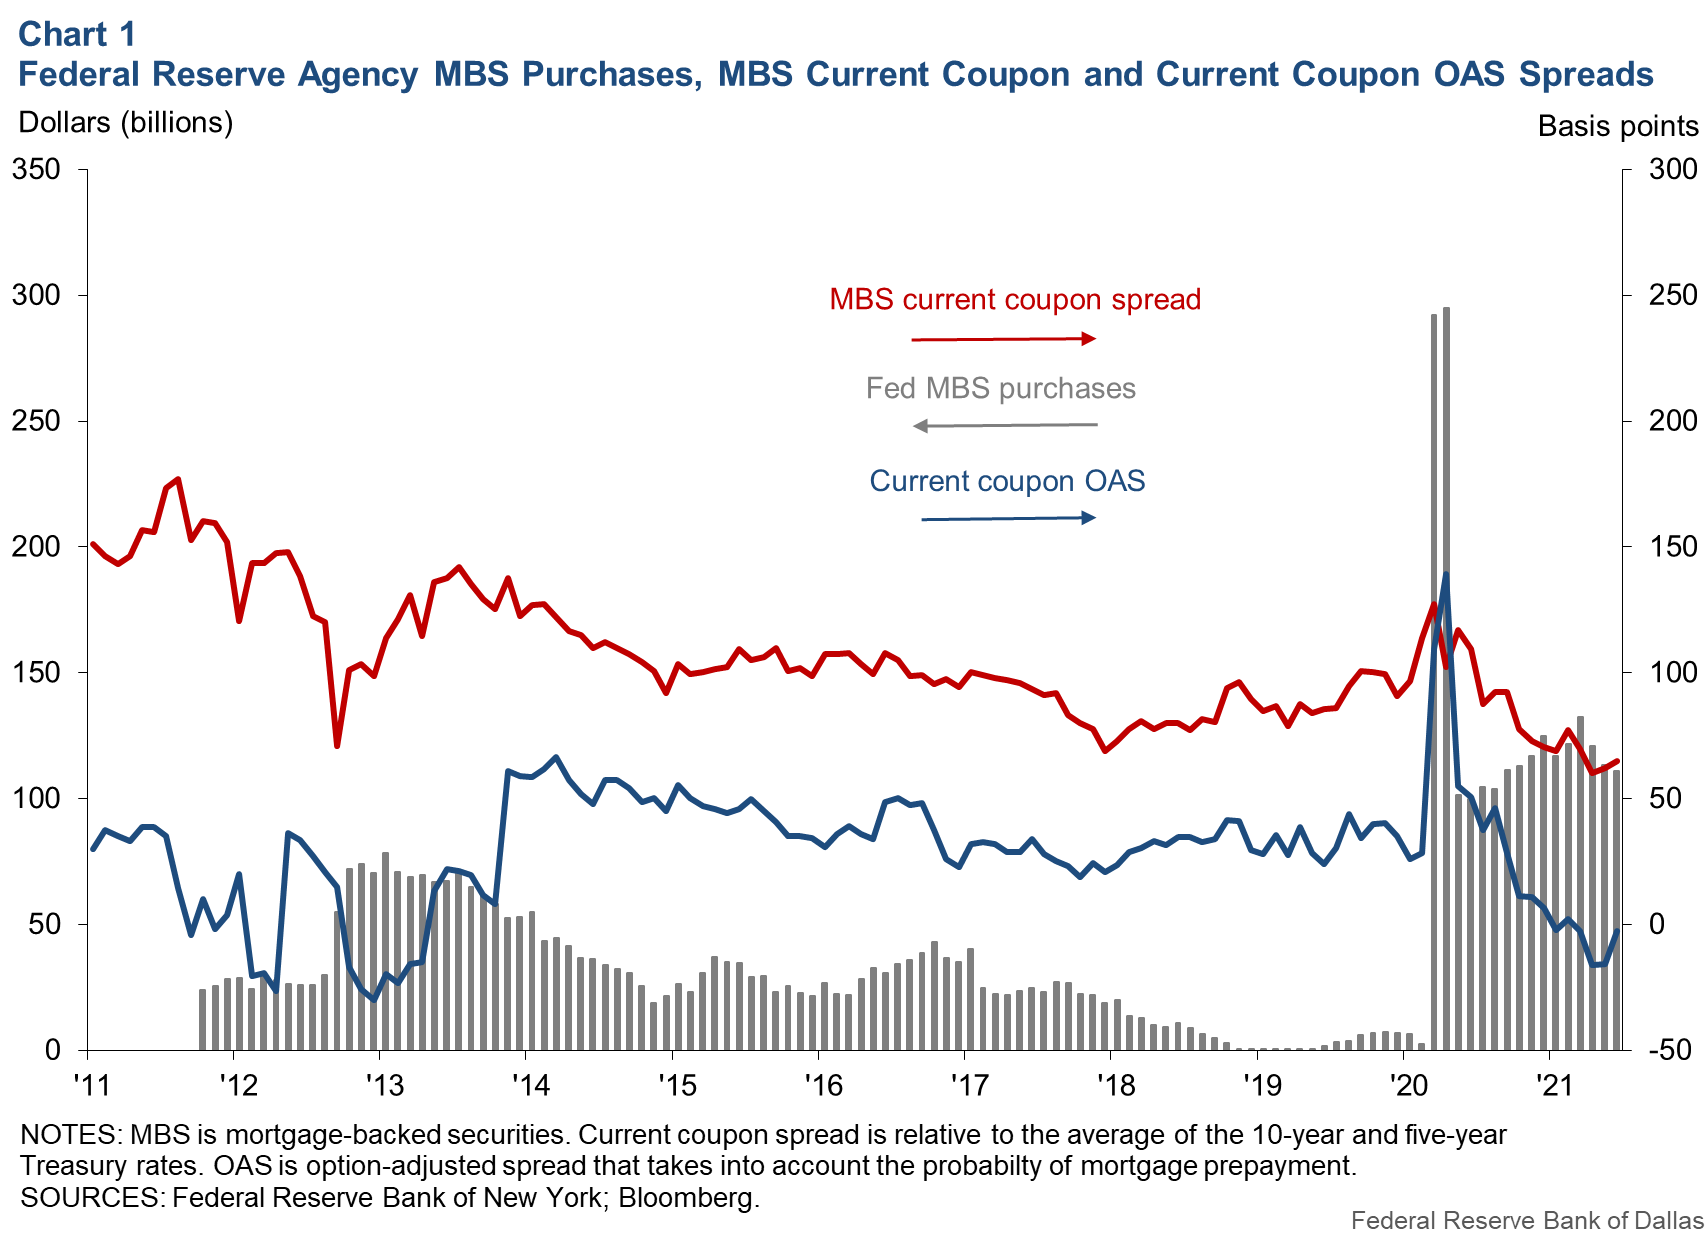 Chart 1: Federal Reserve Agency MBS Purchases, MBS Current Coupon and Current Coupon OAS Spreads